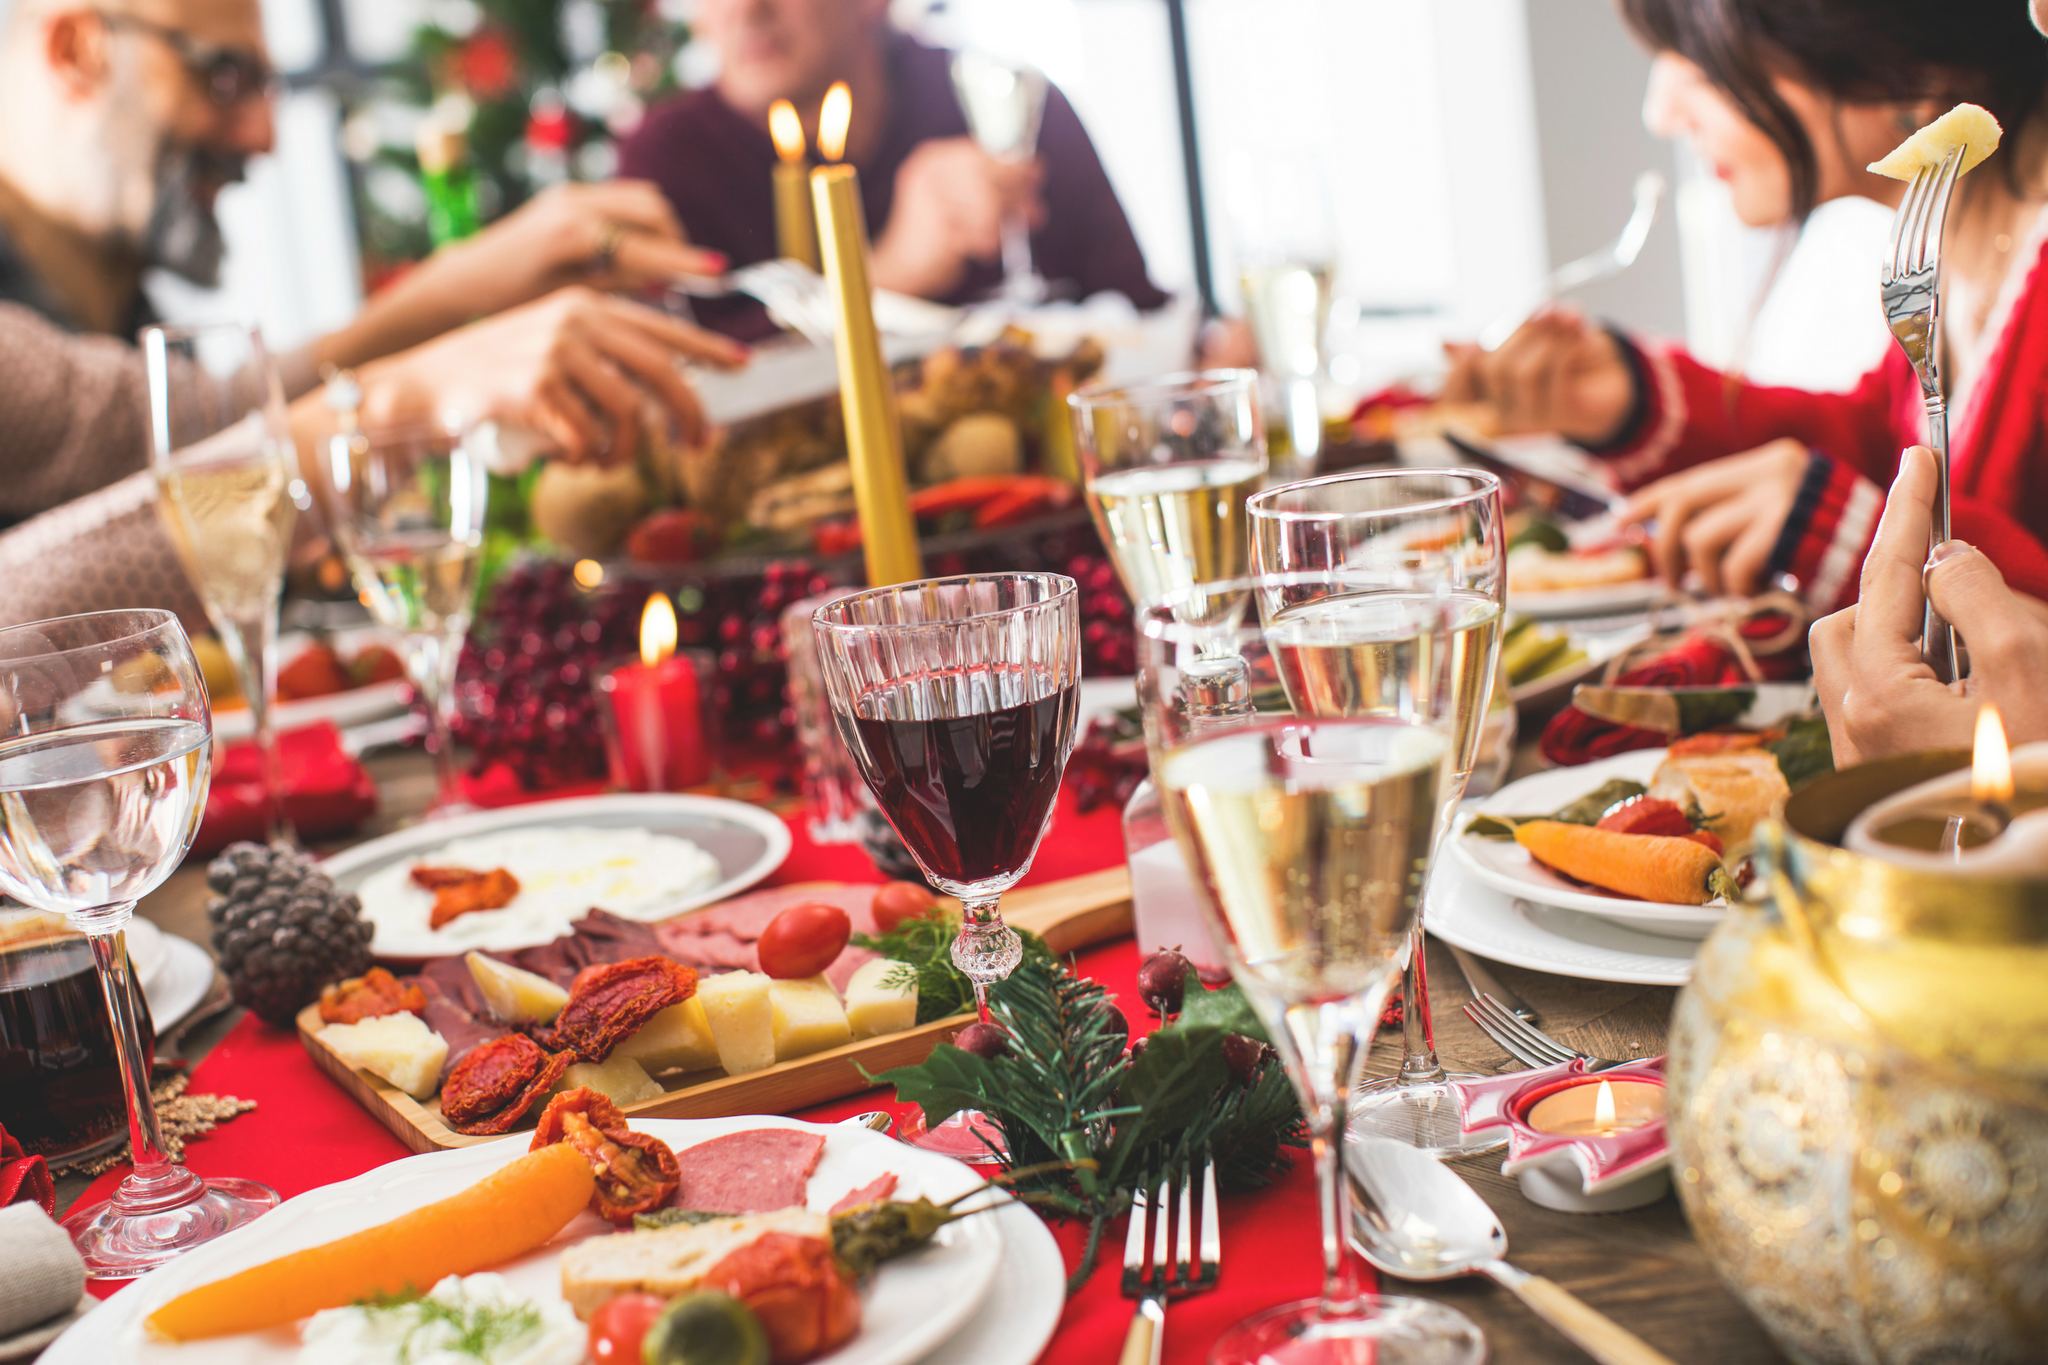 How to enjoy the Christmas festivities with your health in mind